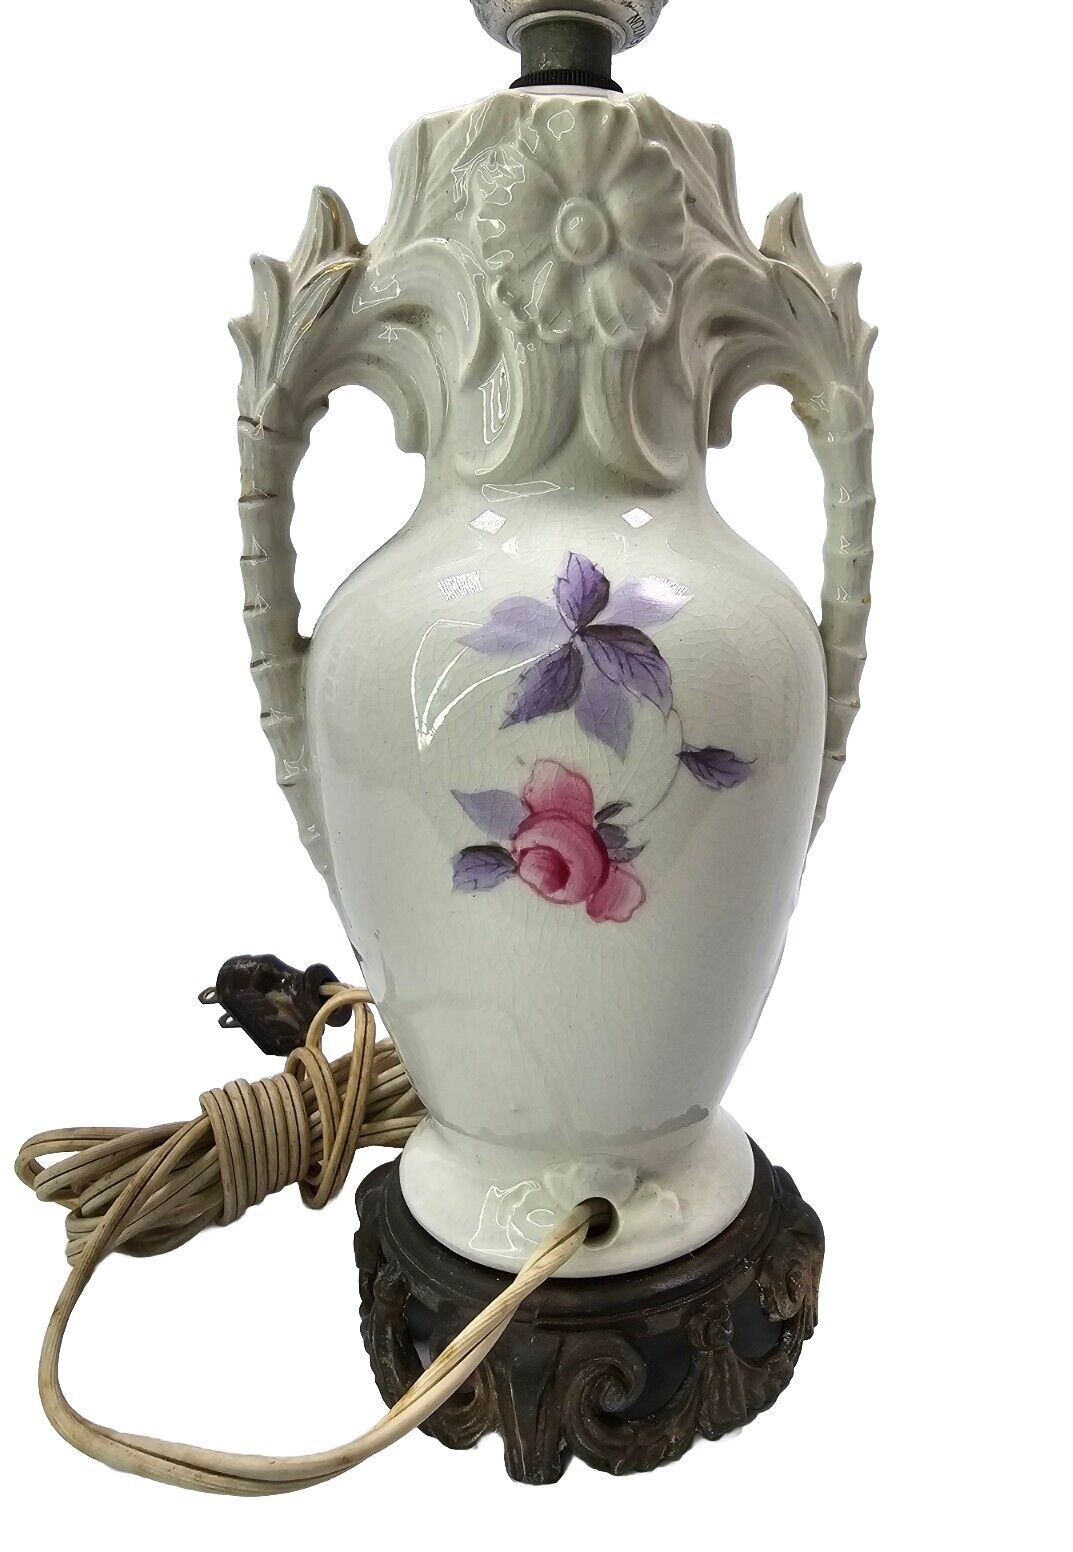 Vintage Ceramic Table Lamp with Hand-Painted Flowers and Ornate Accents.